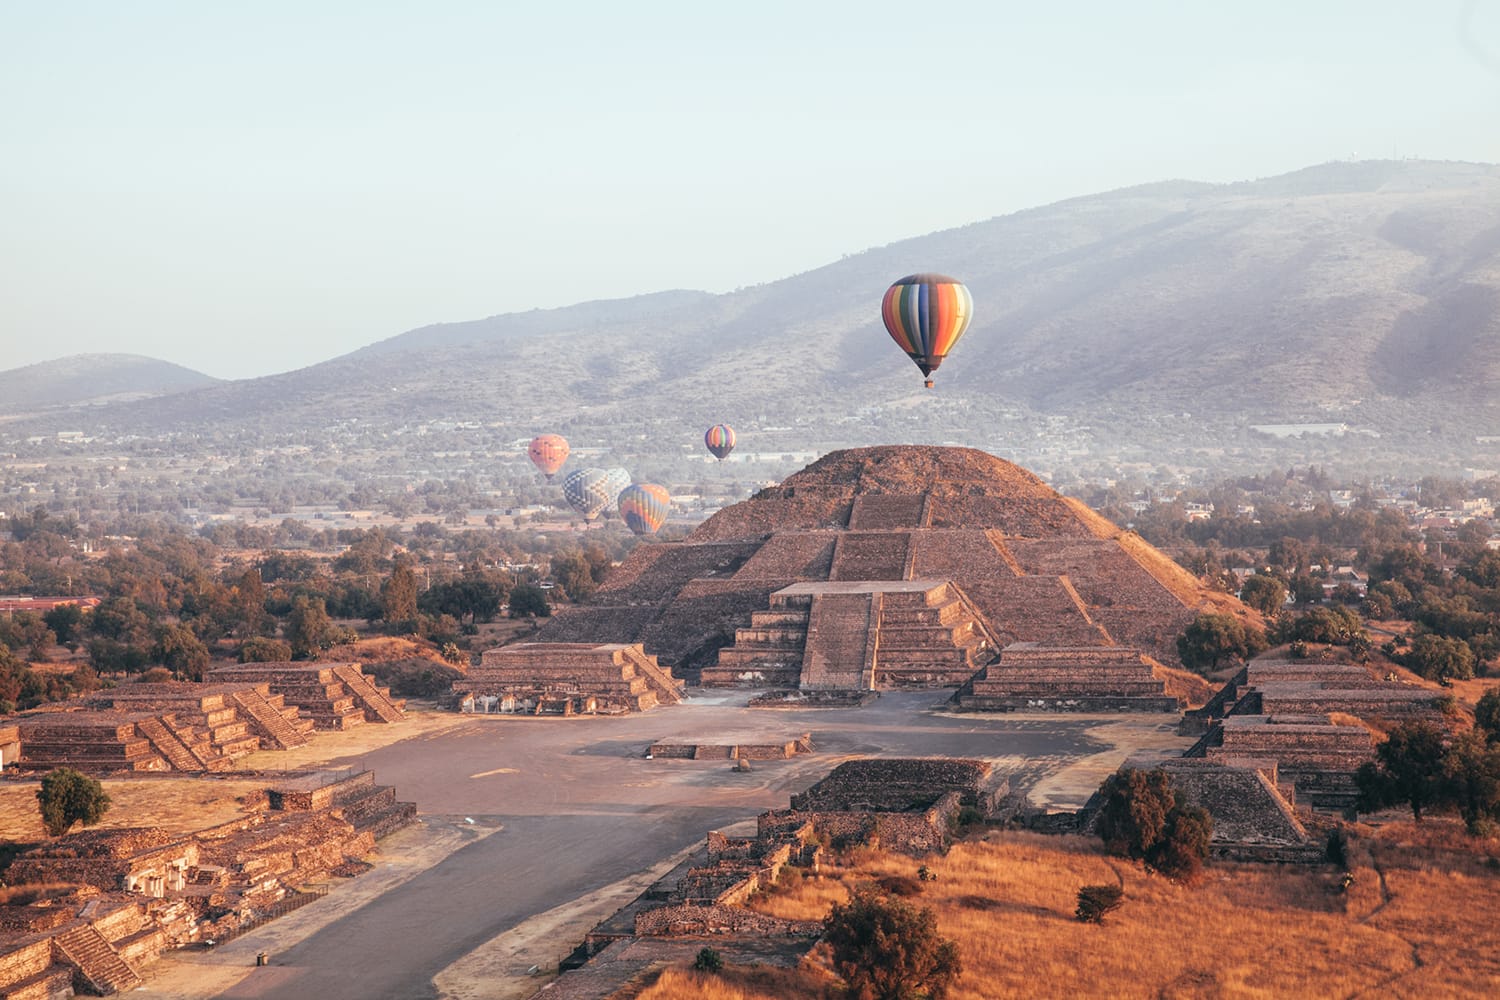 Hot Air Ballons over Teotihuacan, near Mexico City in Mexico